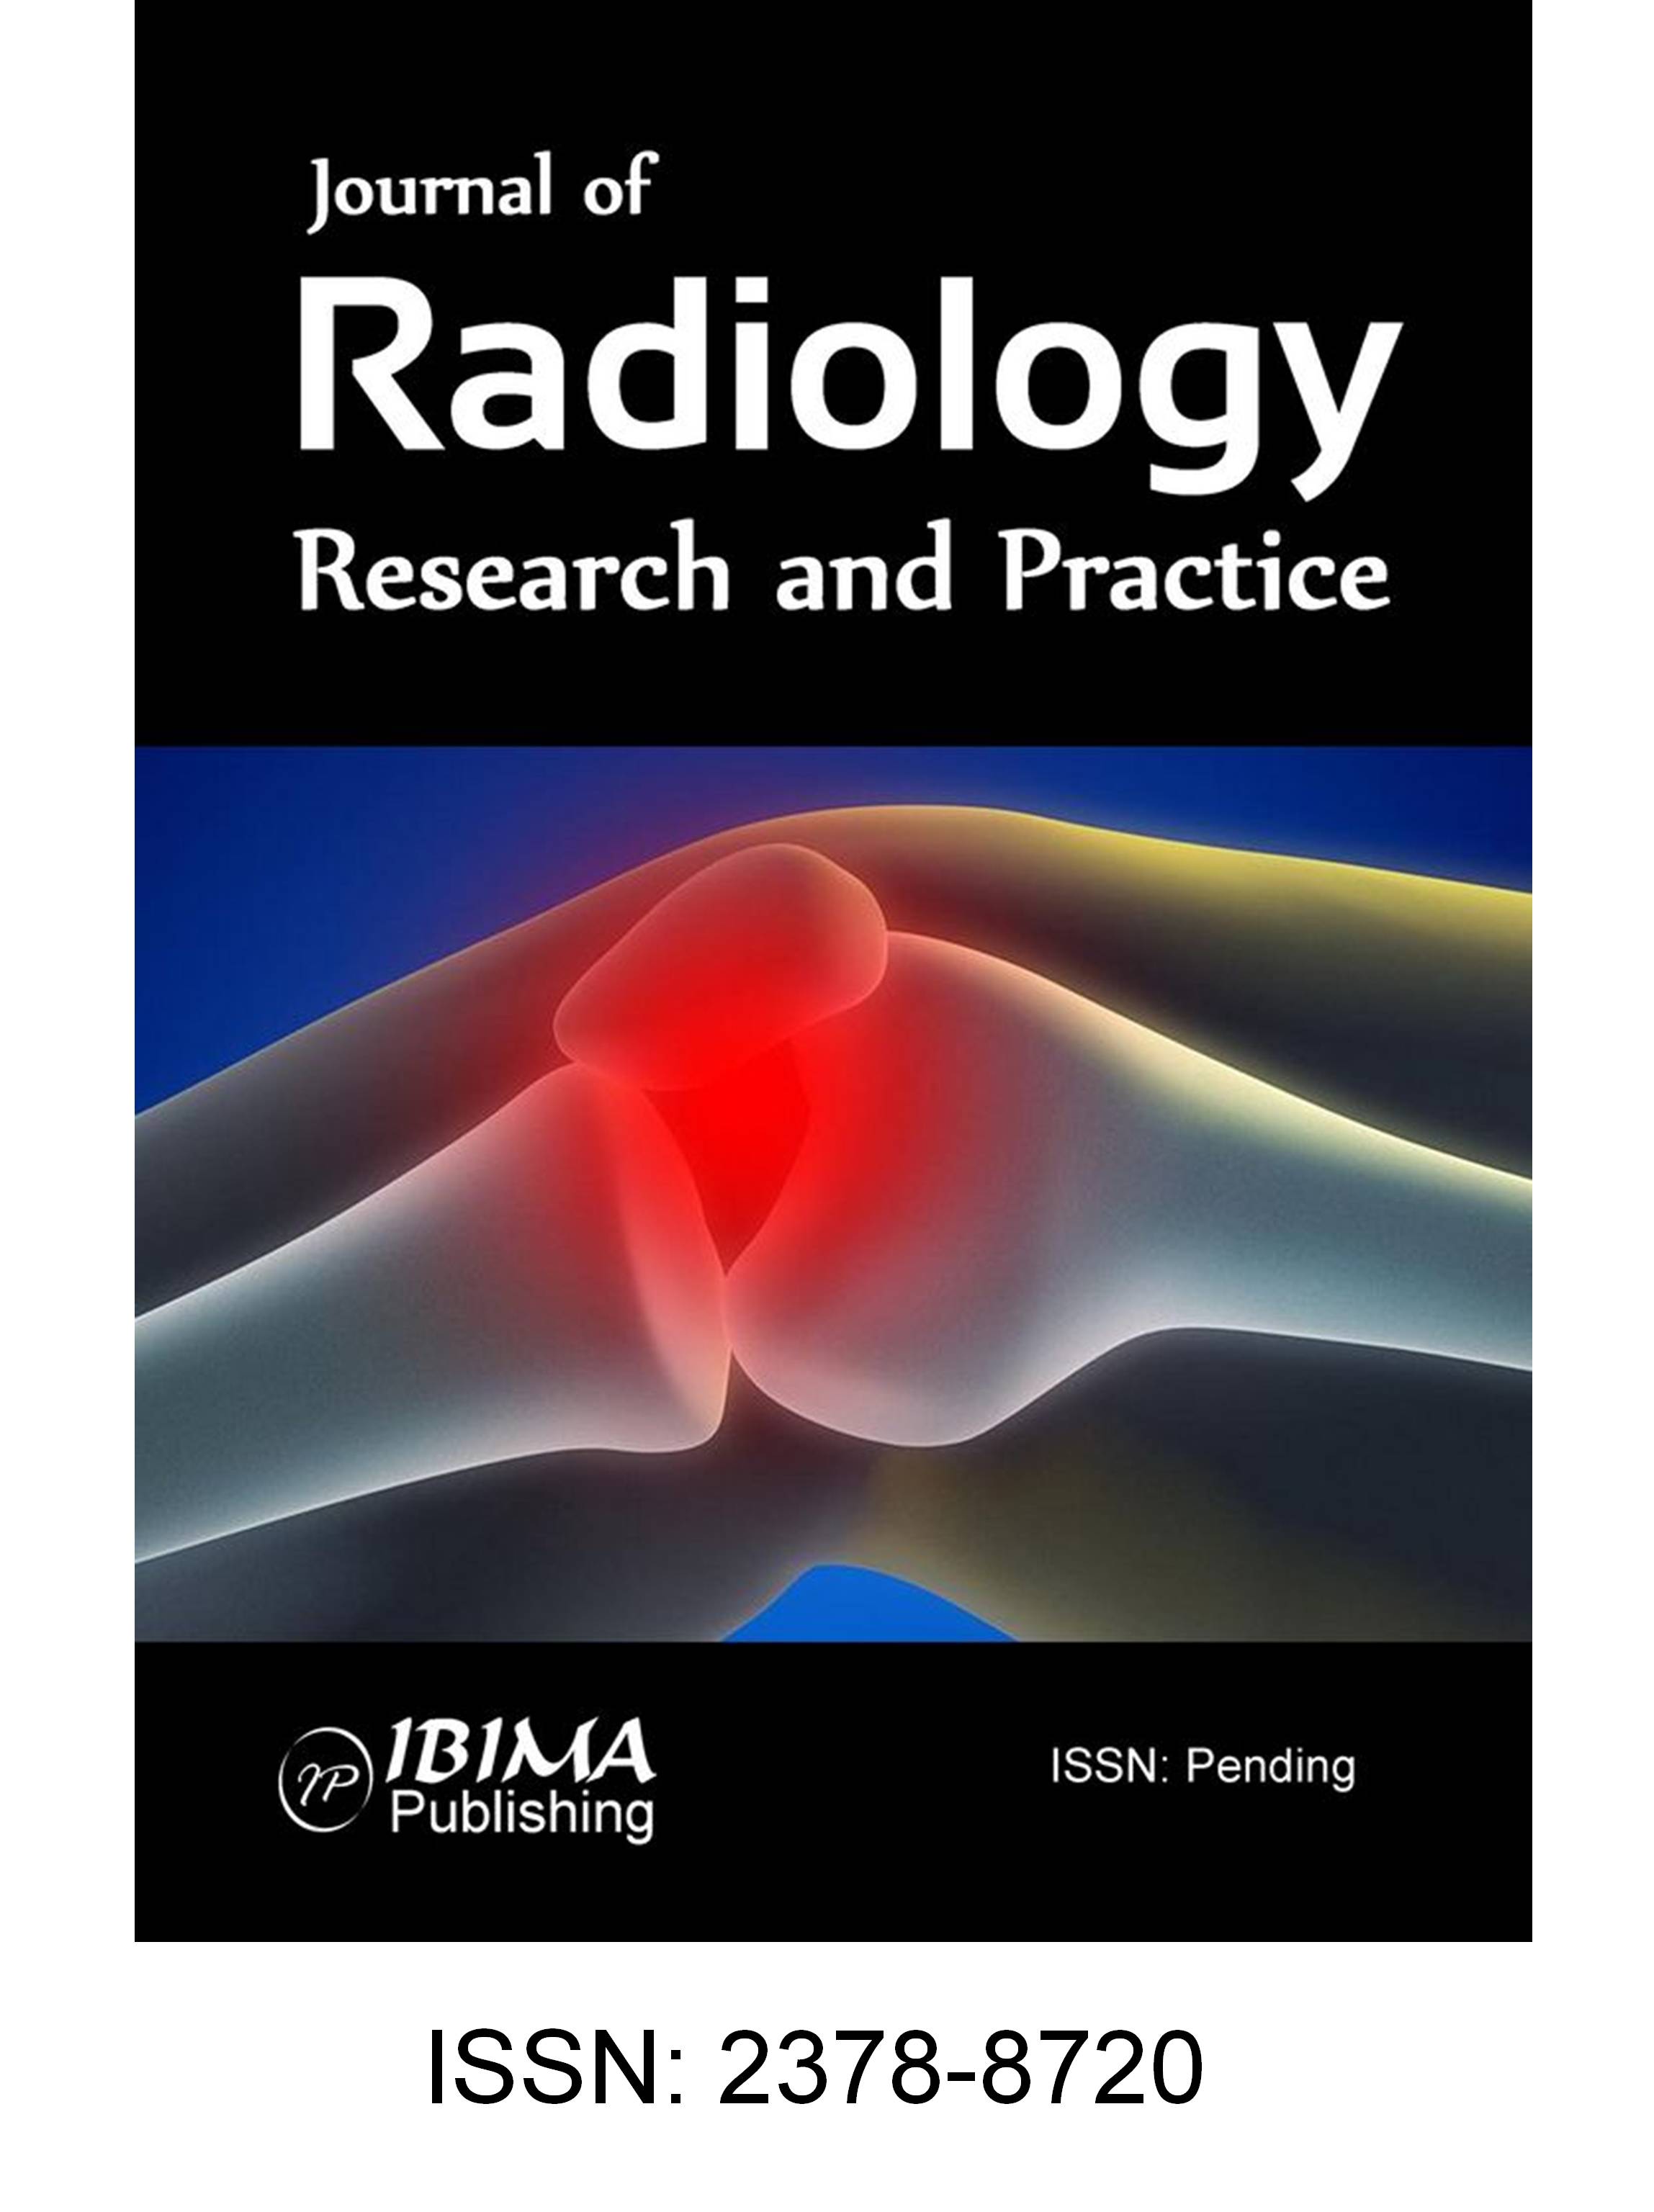 radiology research and practice